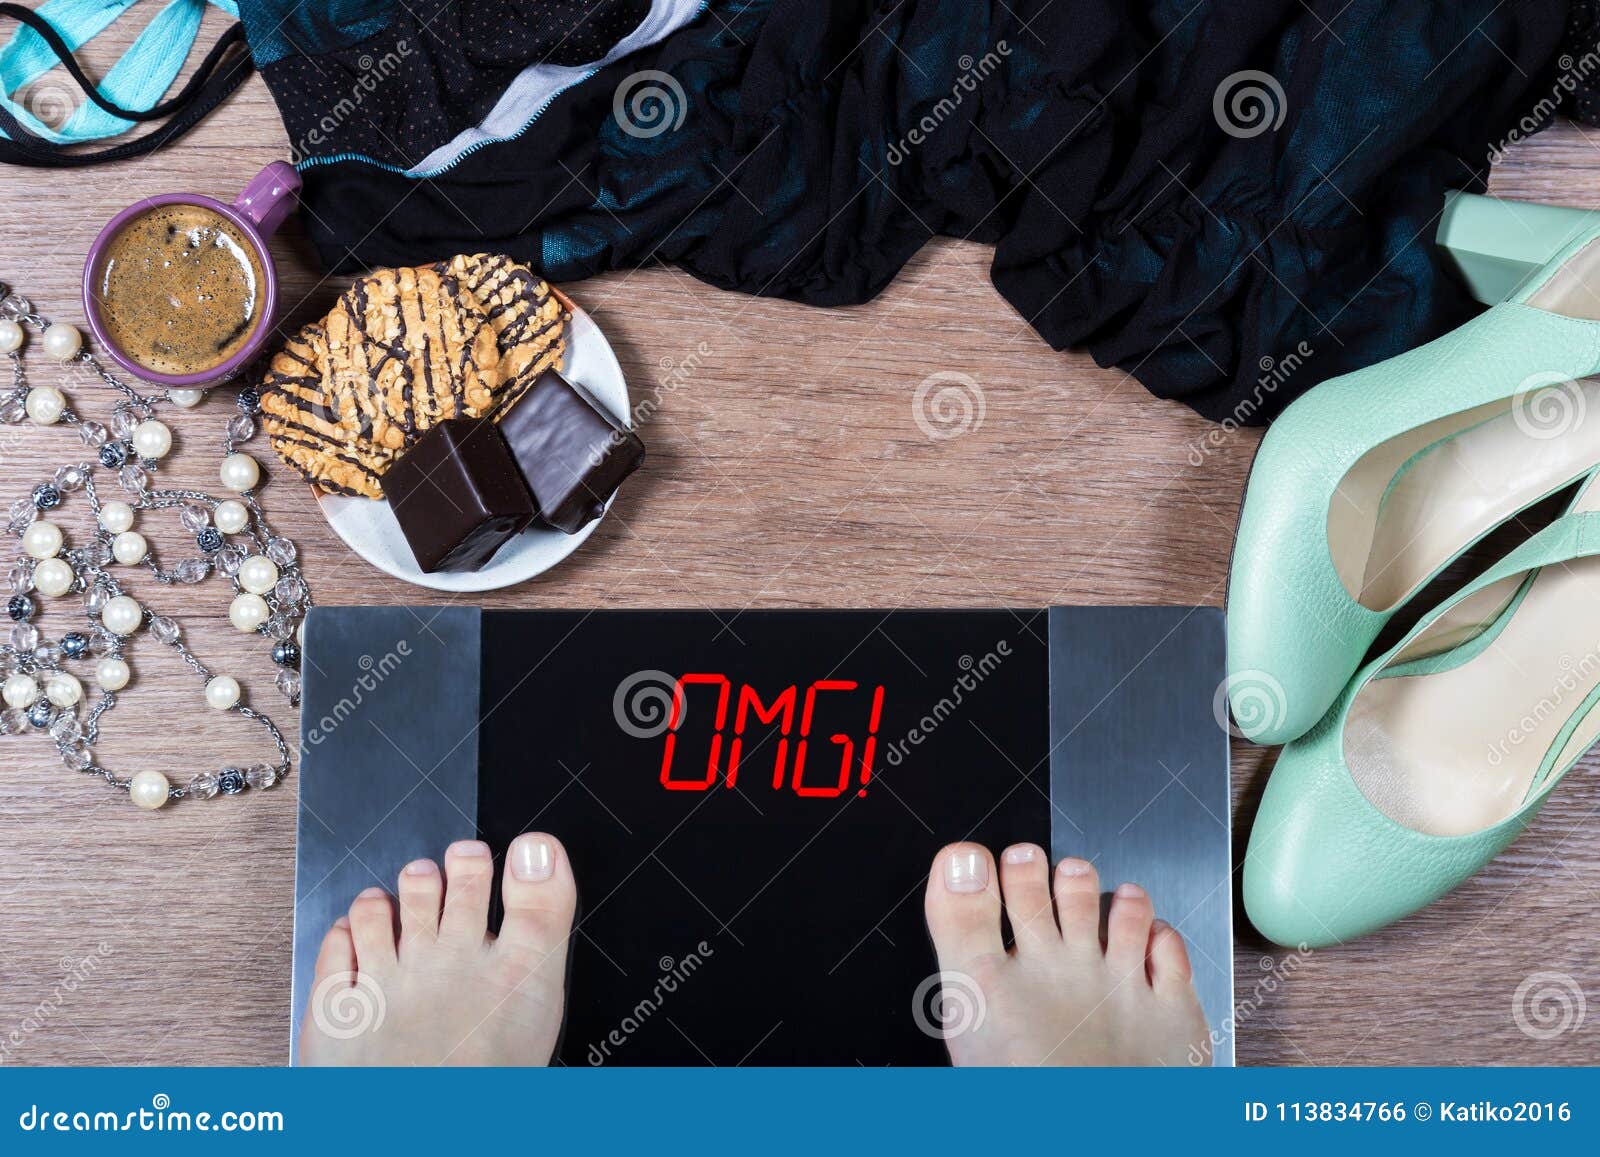 girl checks her weight on digital scales. sign omg! on balance surrounded by cup of coffee, sweets and female clothes and shoes